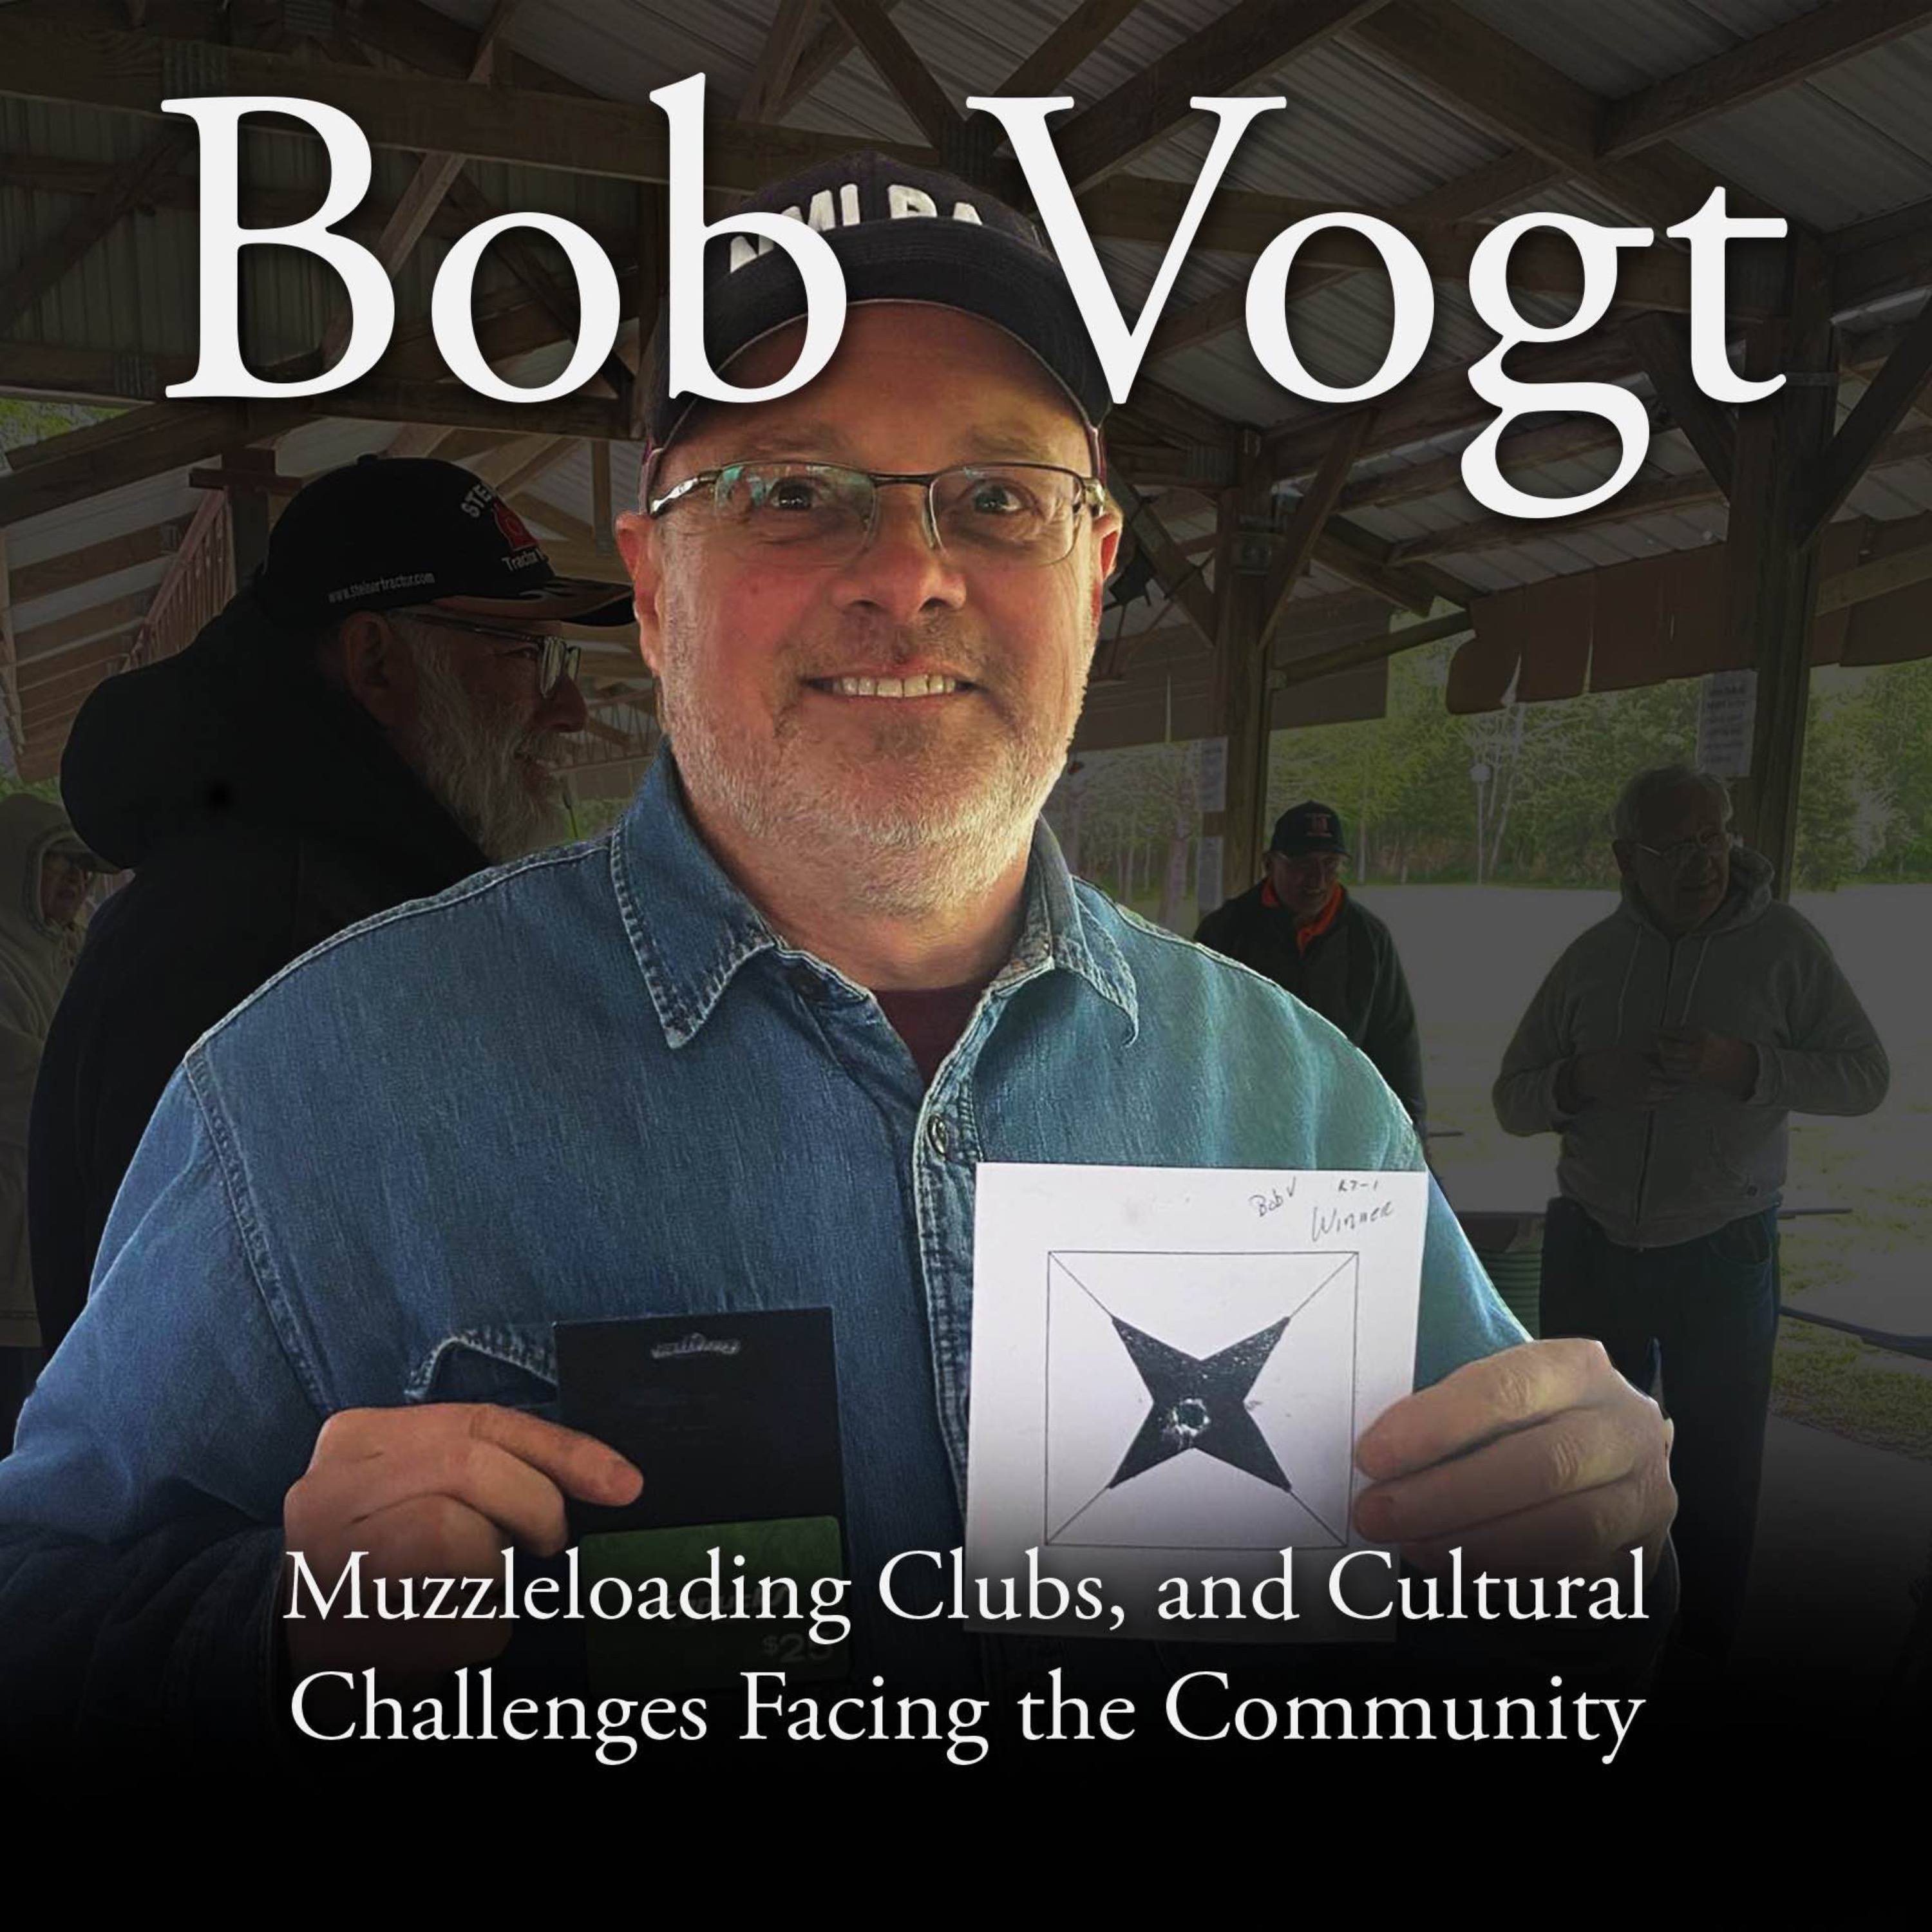 Bob Vogt on The Gemmer Muzzleloading Club, Promoting the Hobby, and Cultural Challenges Facing Muzzleloading